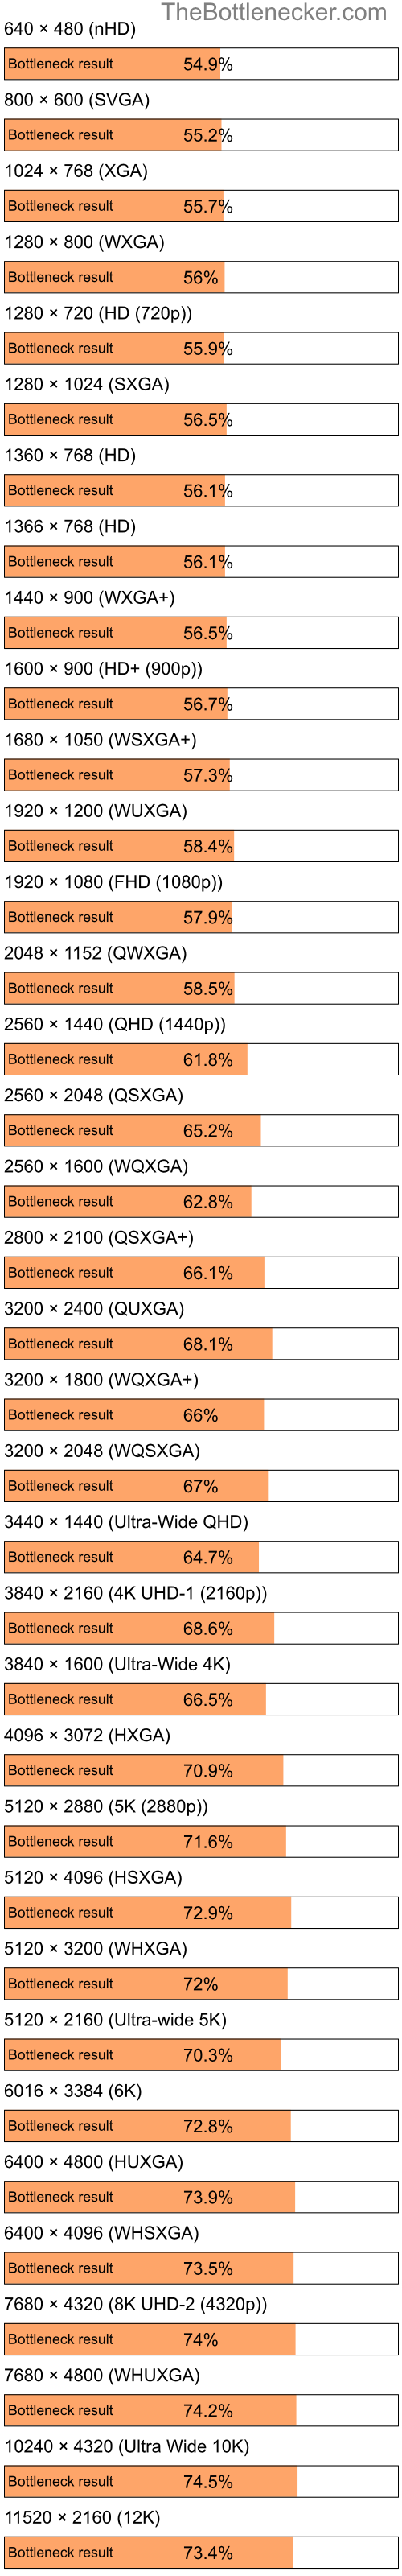 Bottleneck results by resolution for Intel Pentium 4 and AMD Mobility Radeon HD 3450 in Processor Intense Tasks